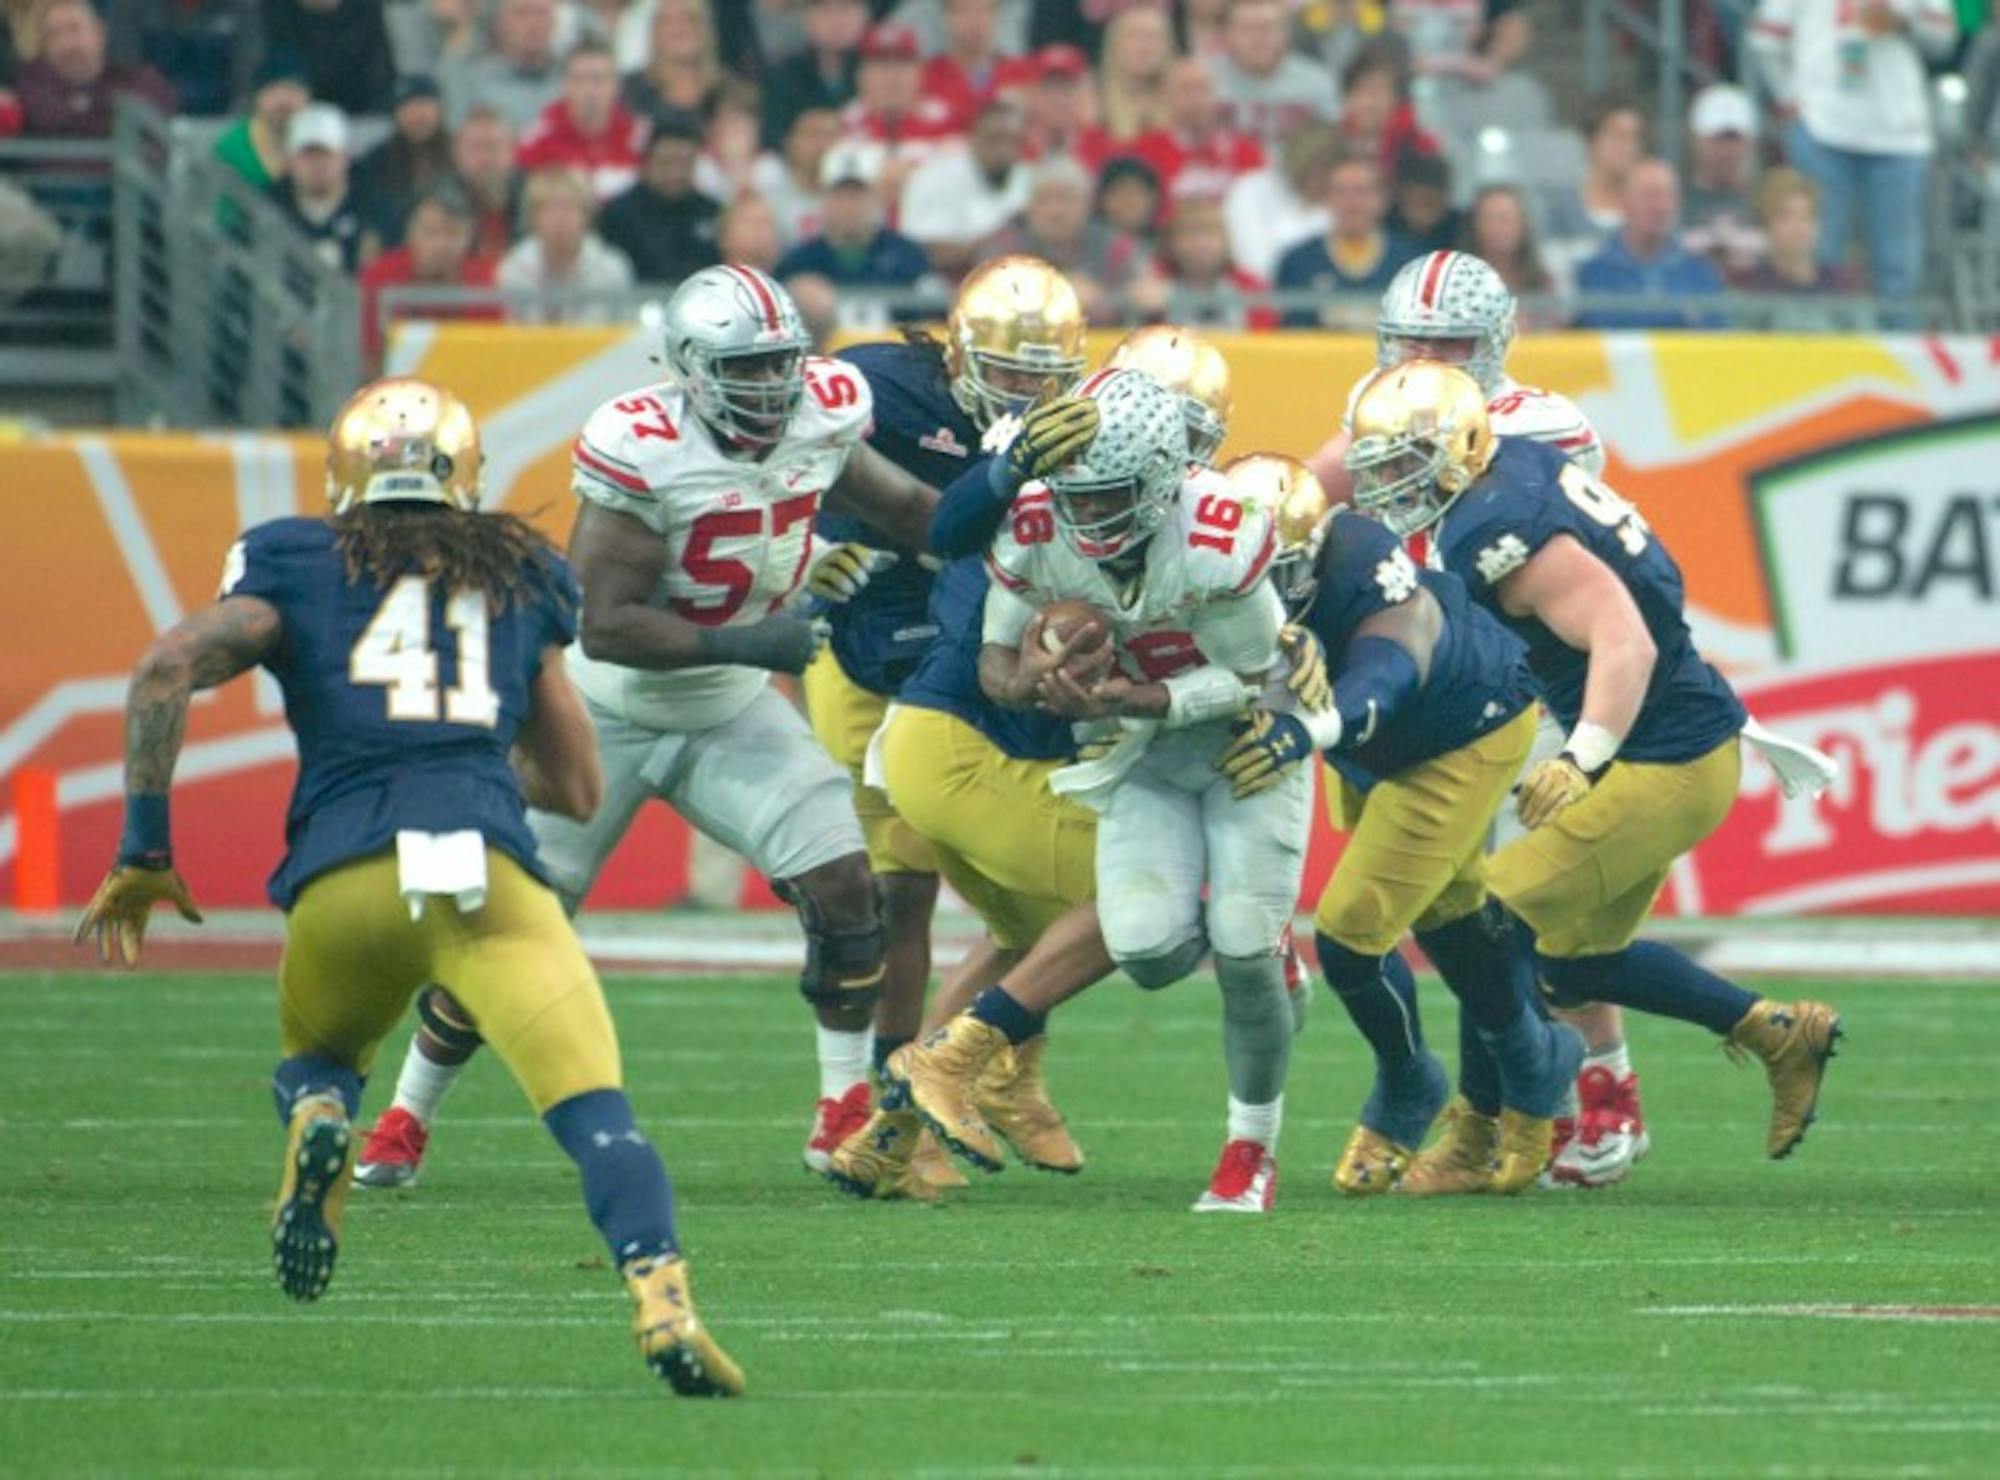 Notre Dame defenders swarm Ohio State sophomore quarterback J.T. Barrett as he scrambles for a gain during the Buckeyes' 44-28 victory over the Irish on Friday.